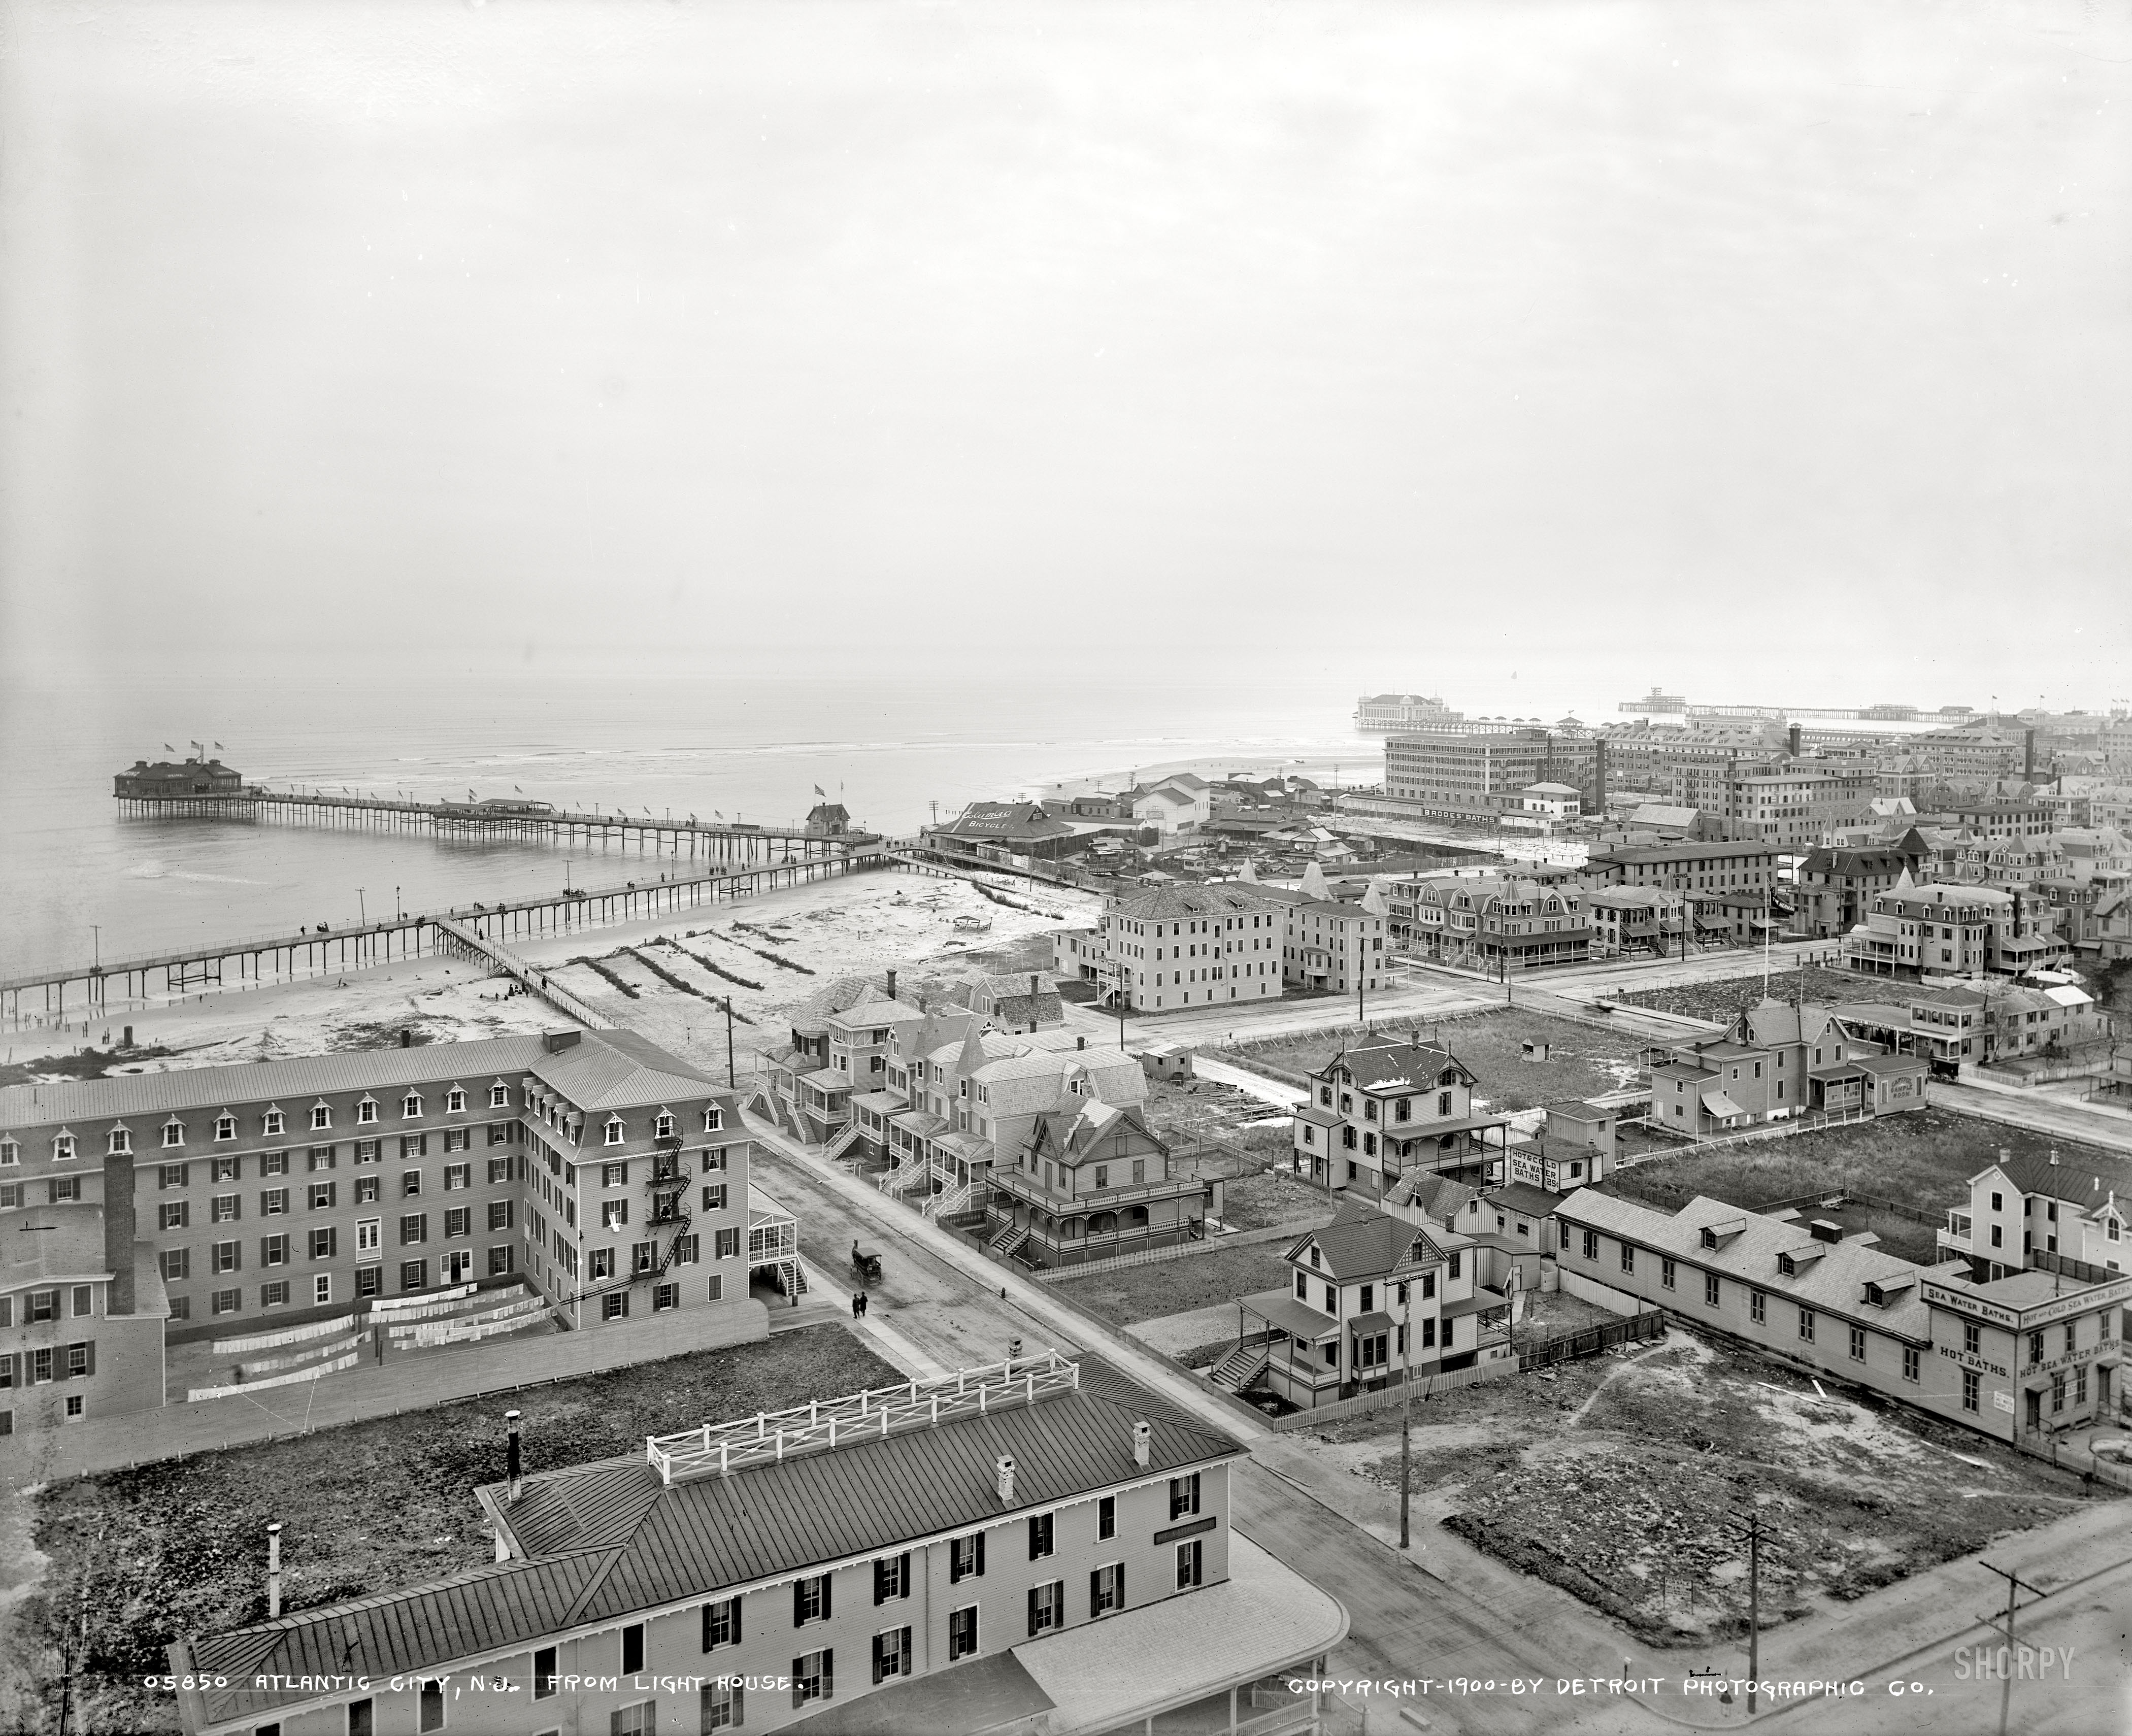 The Jersey Shore circa 1900. "Atlantic City from lighthouse." View just to the left of the previous post. Detroit Publishing Company glass negative. View full size.